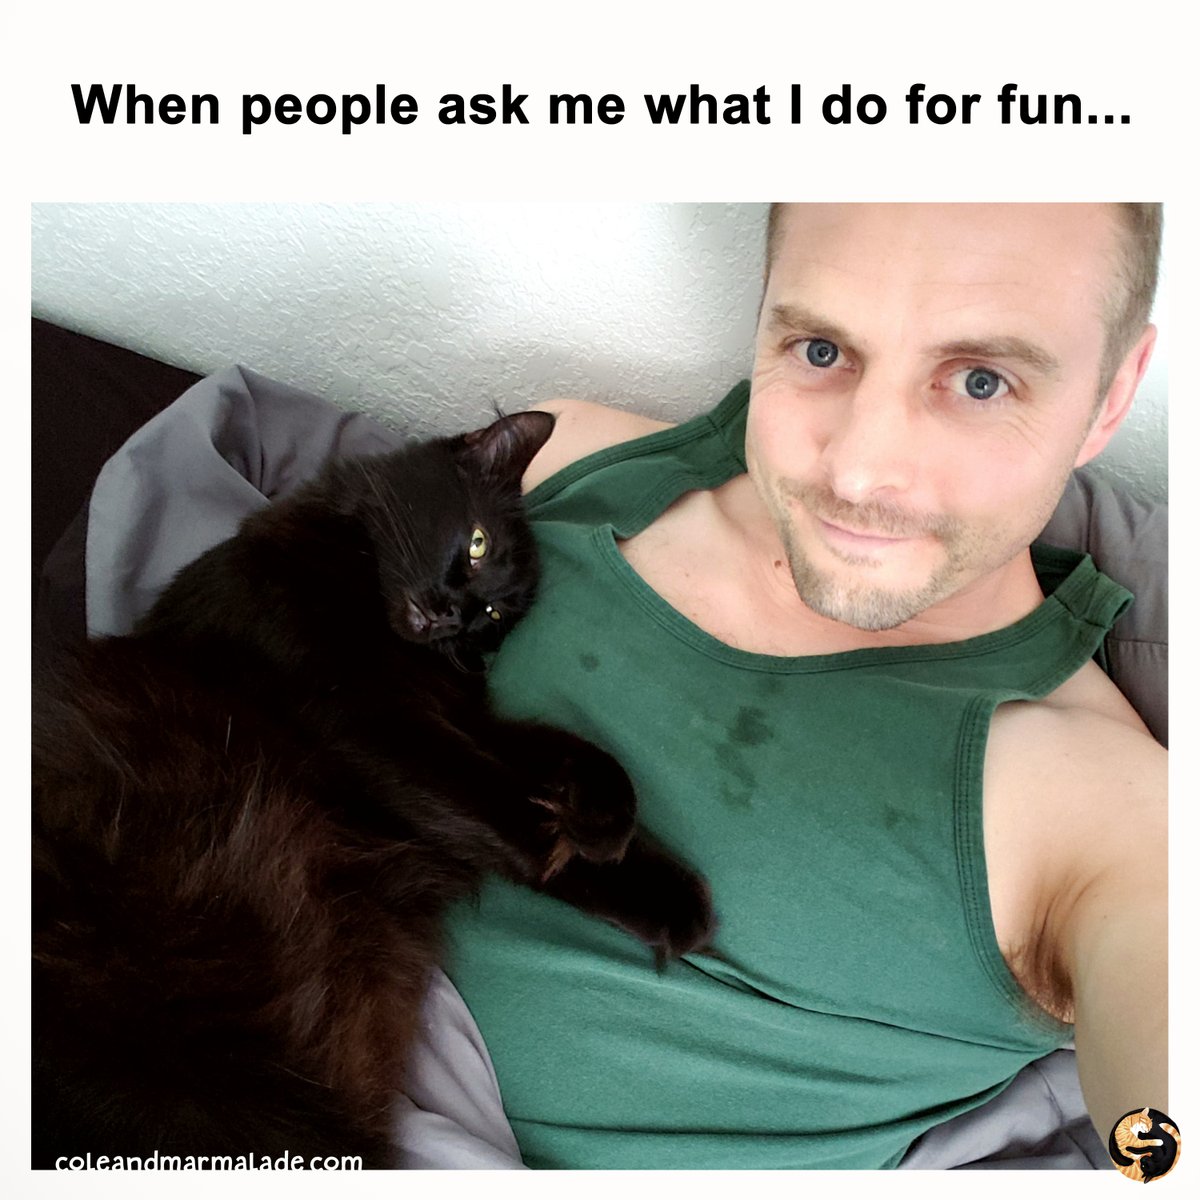 Who else is having lots of fun this weekend? 👍
#KittyTherapy #SnuggleTime #Nap #Cats